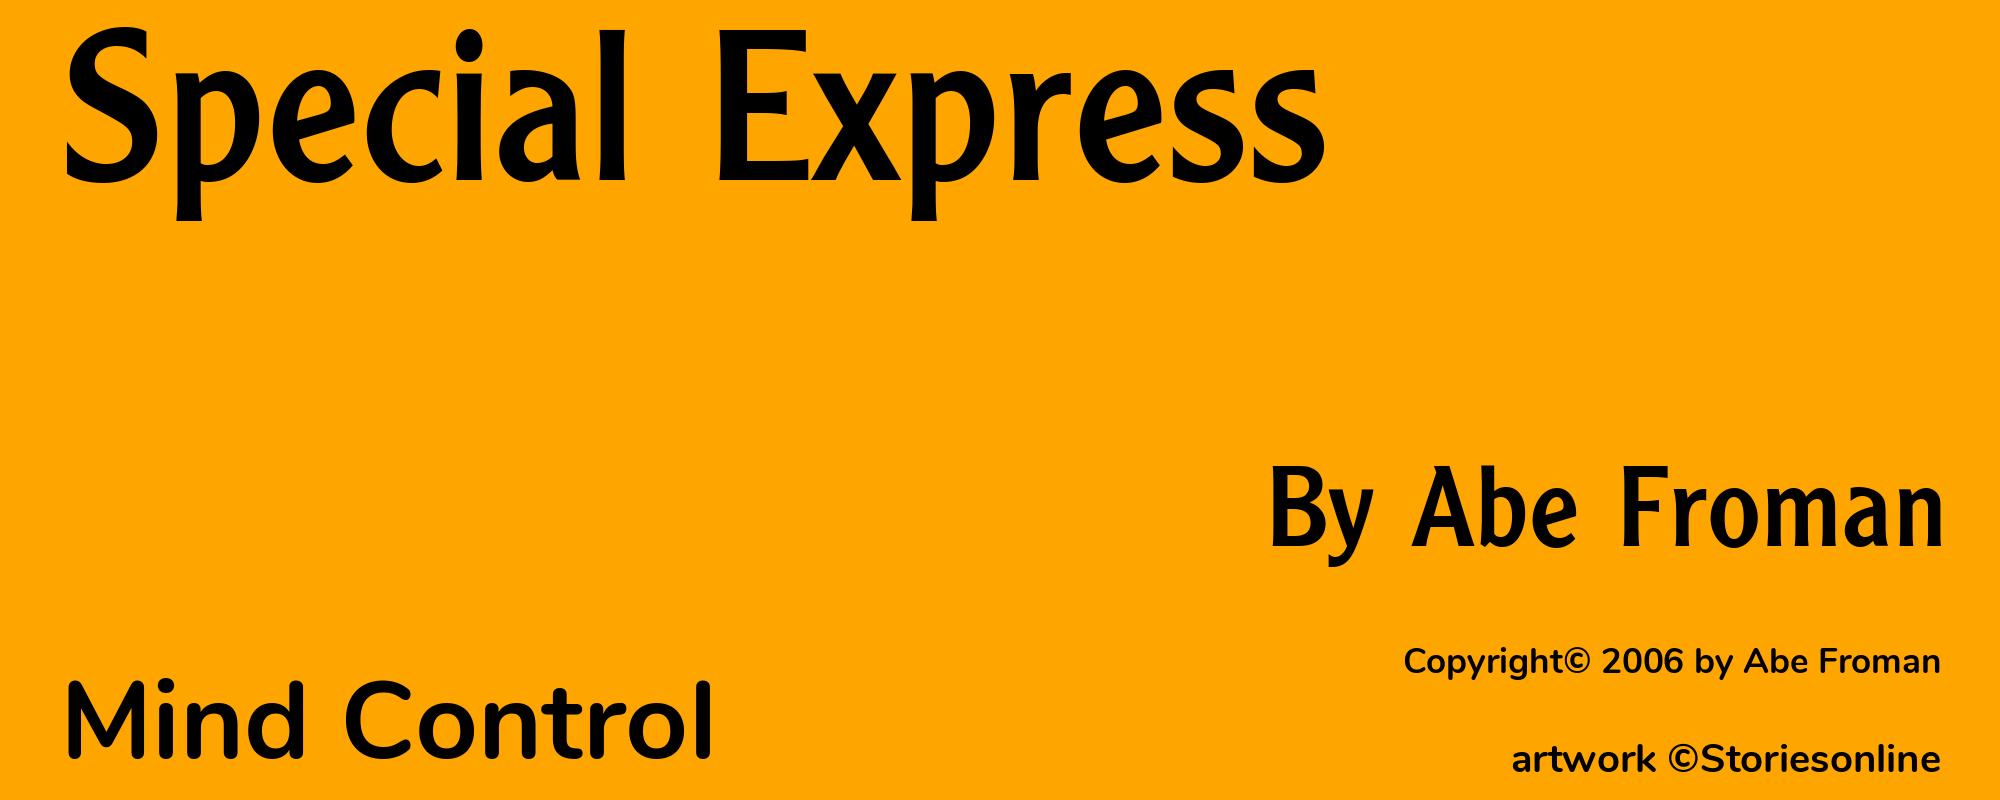 Special Express - Cover